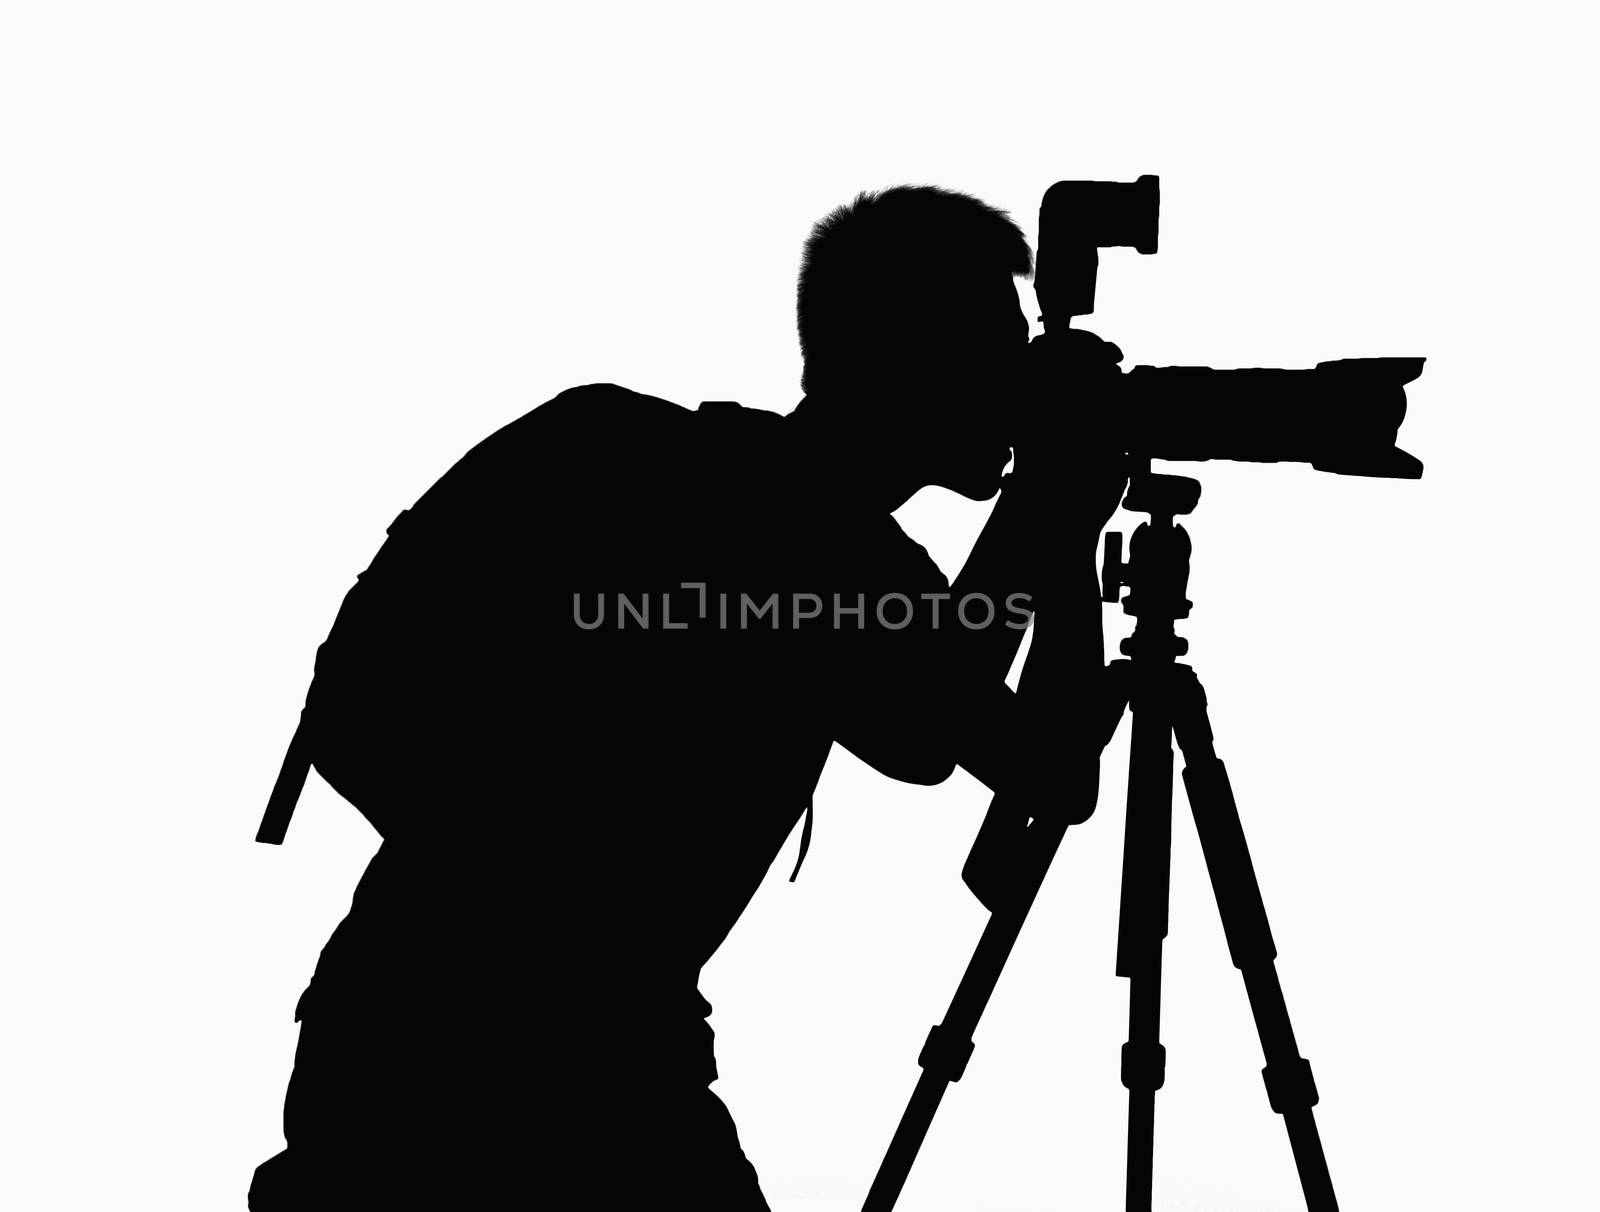 Silhouette of man taking pictures with camera on tripod.